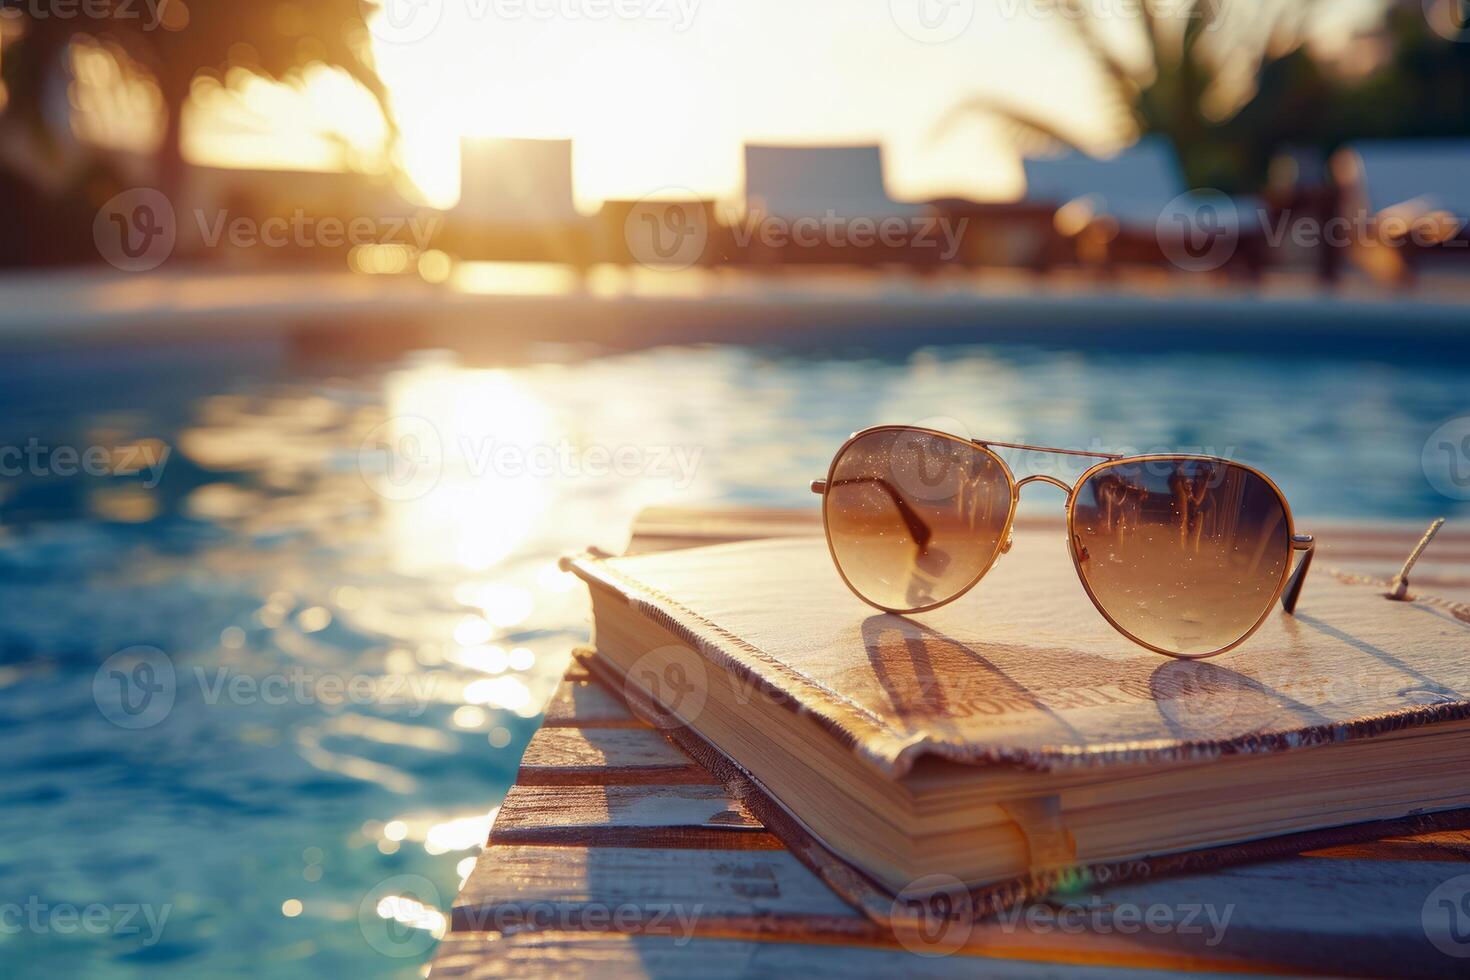 Pair of sunglasses resting on book by the poolside, epitomizing lazy summer days photo